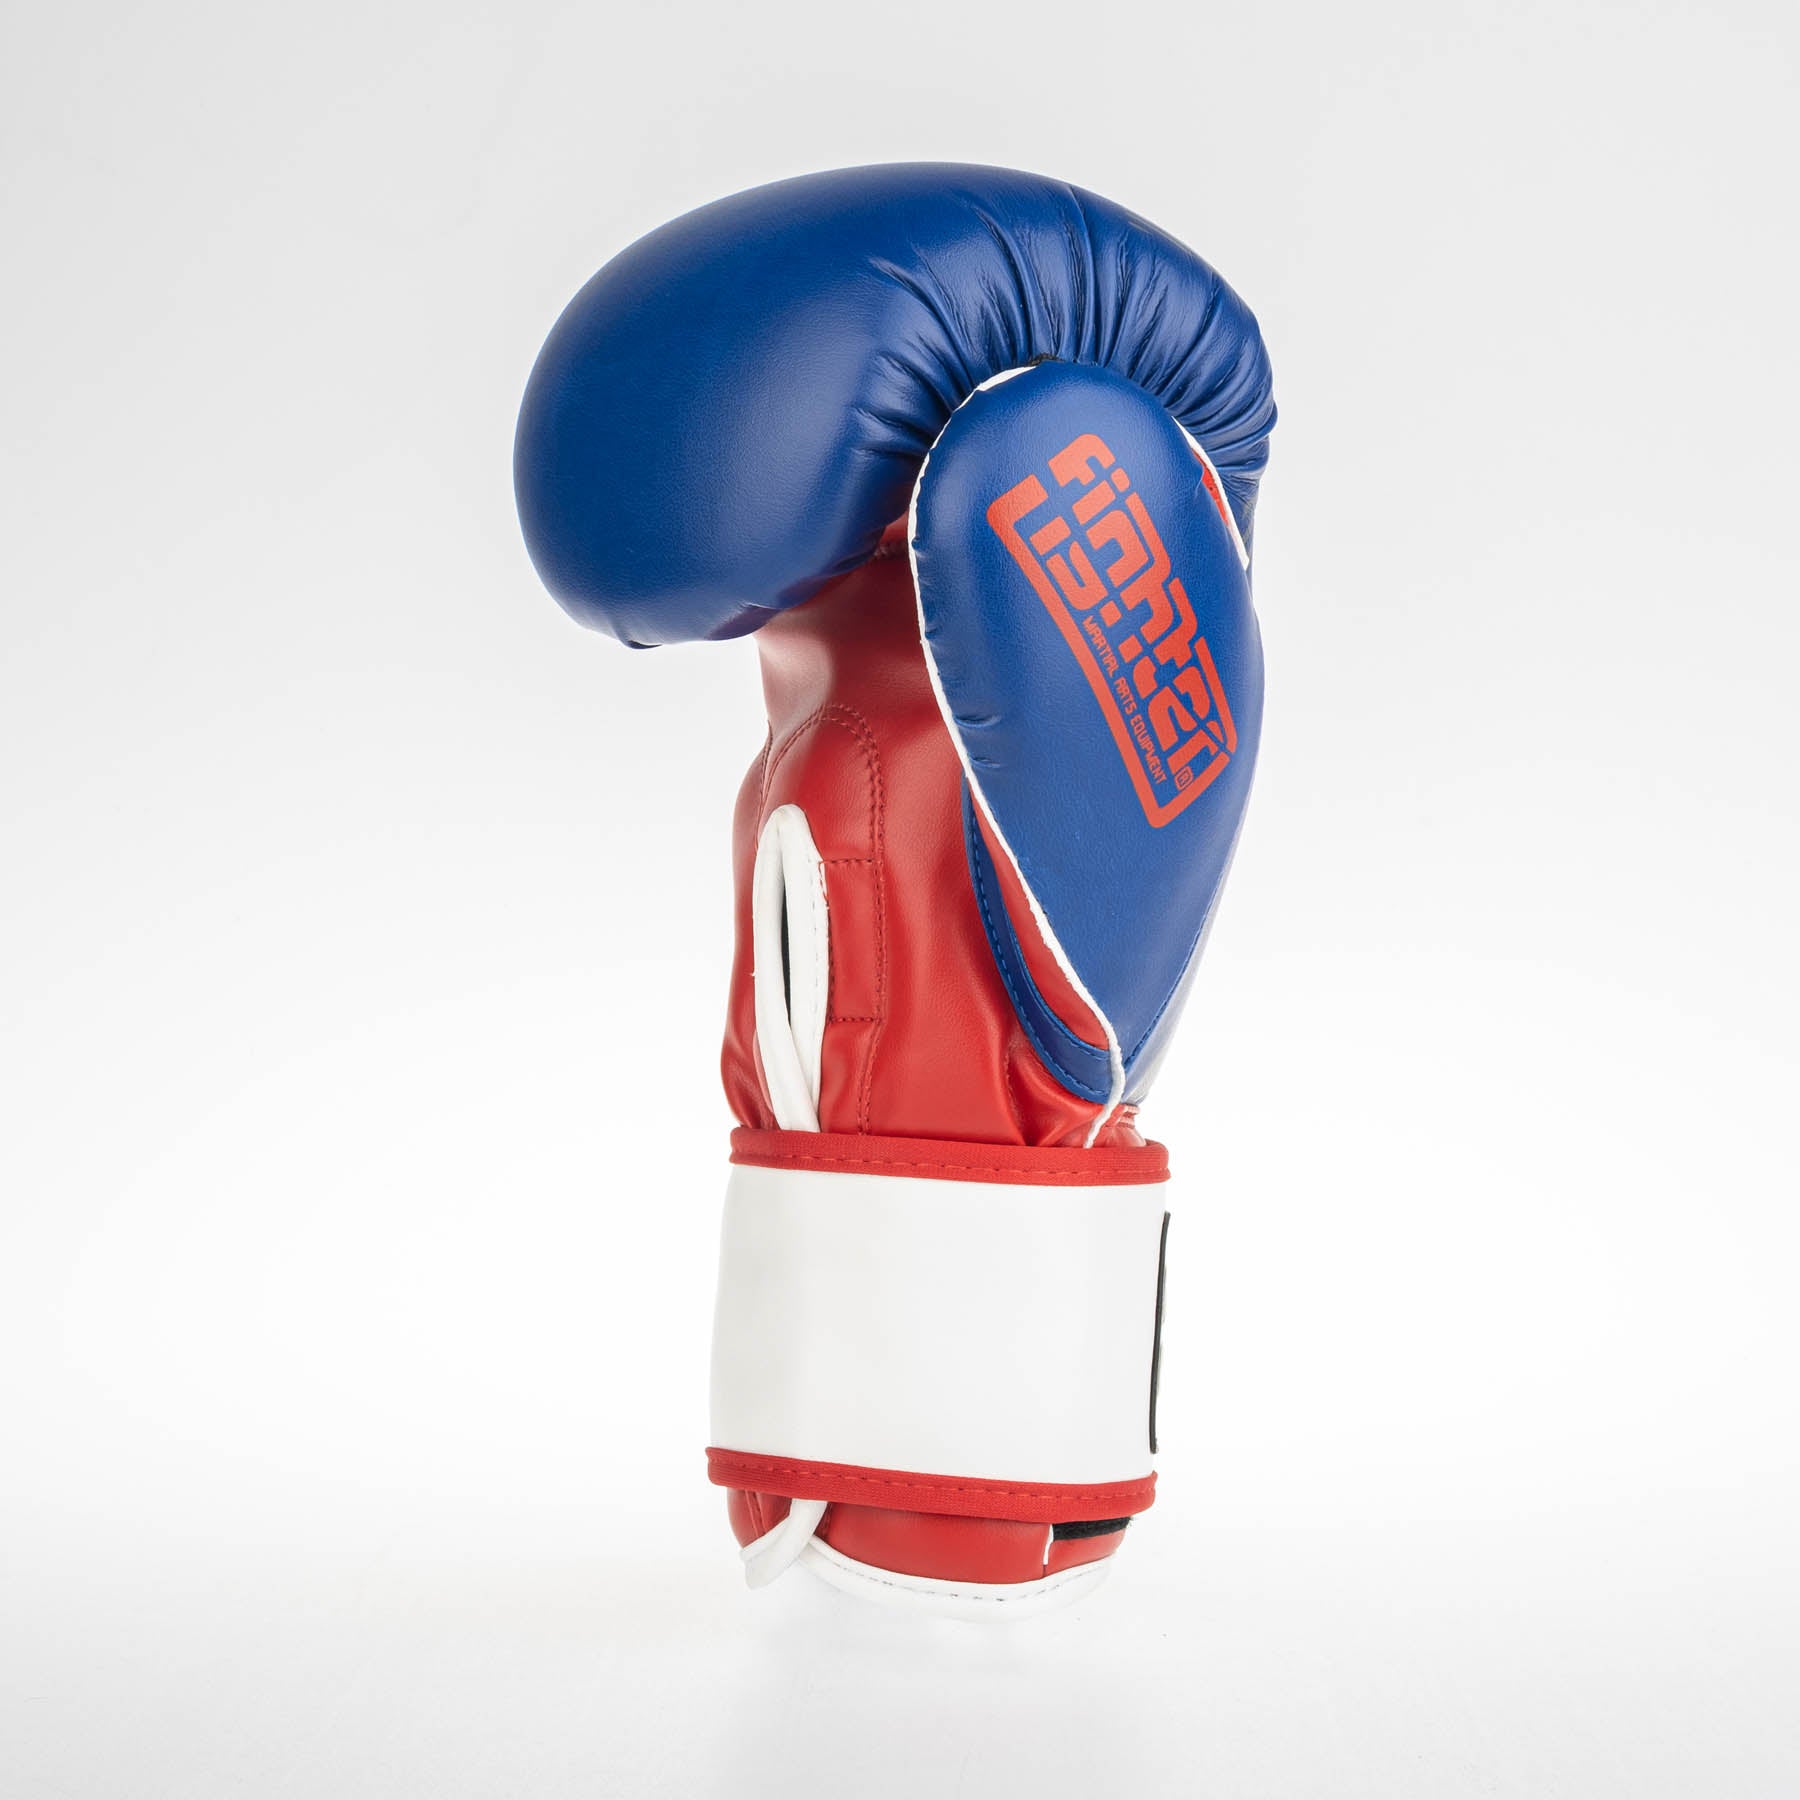 Fighter Boxhandschuhe SPEED - tricolor